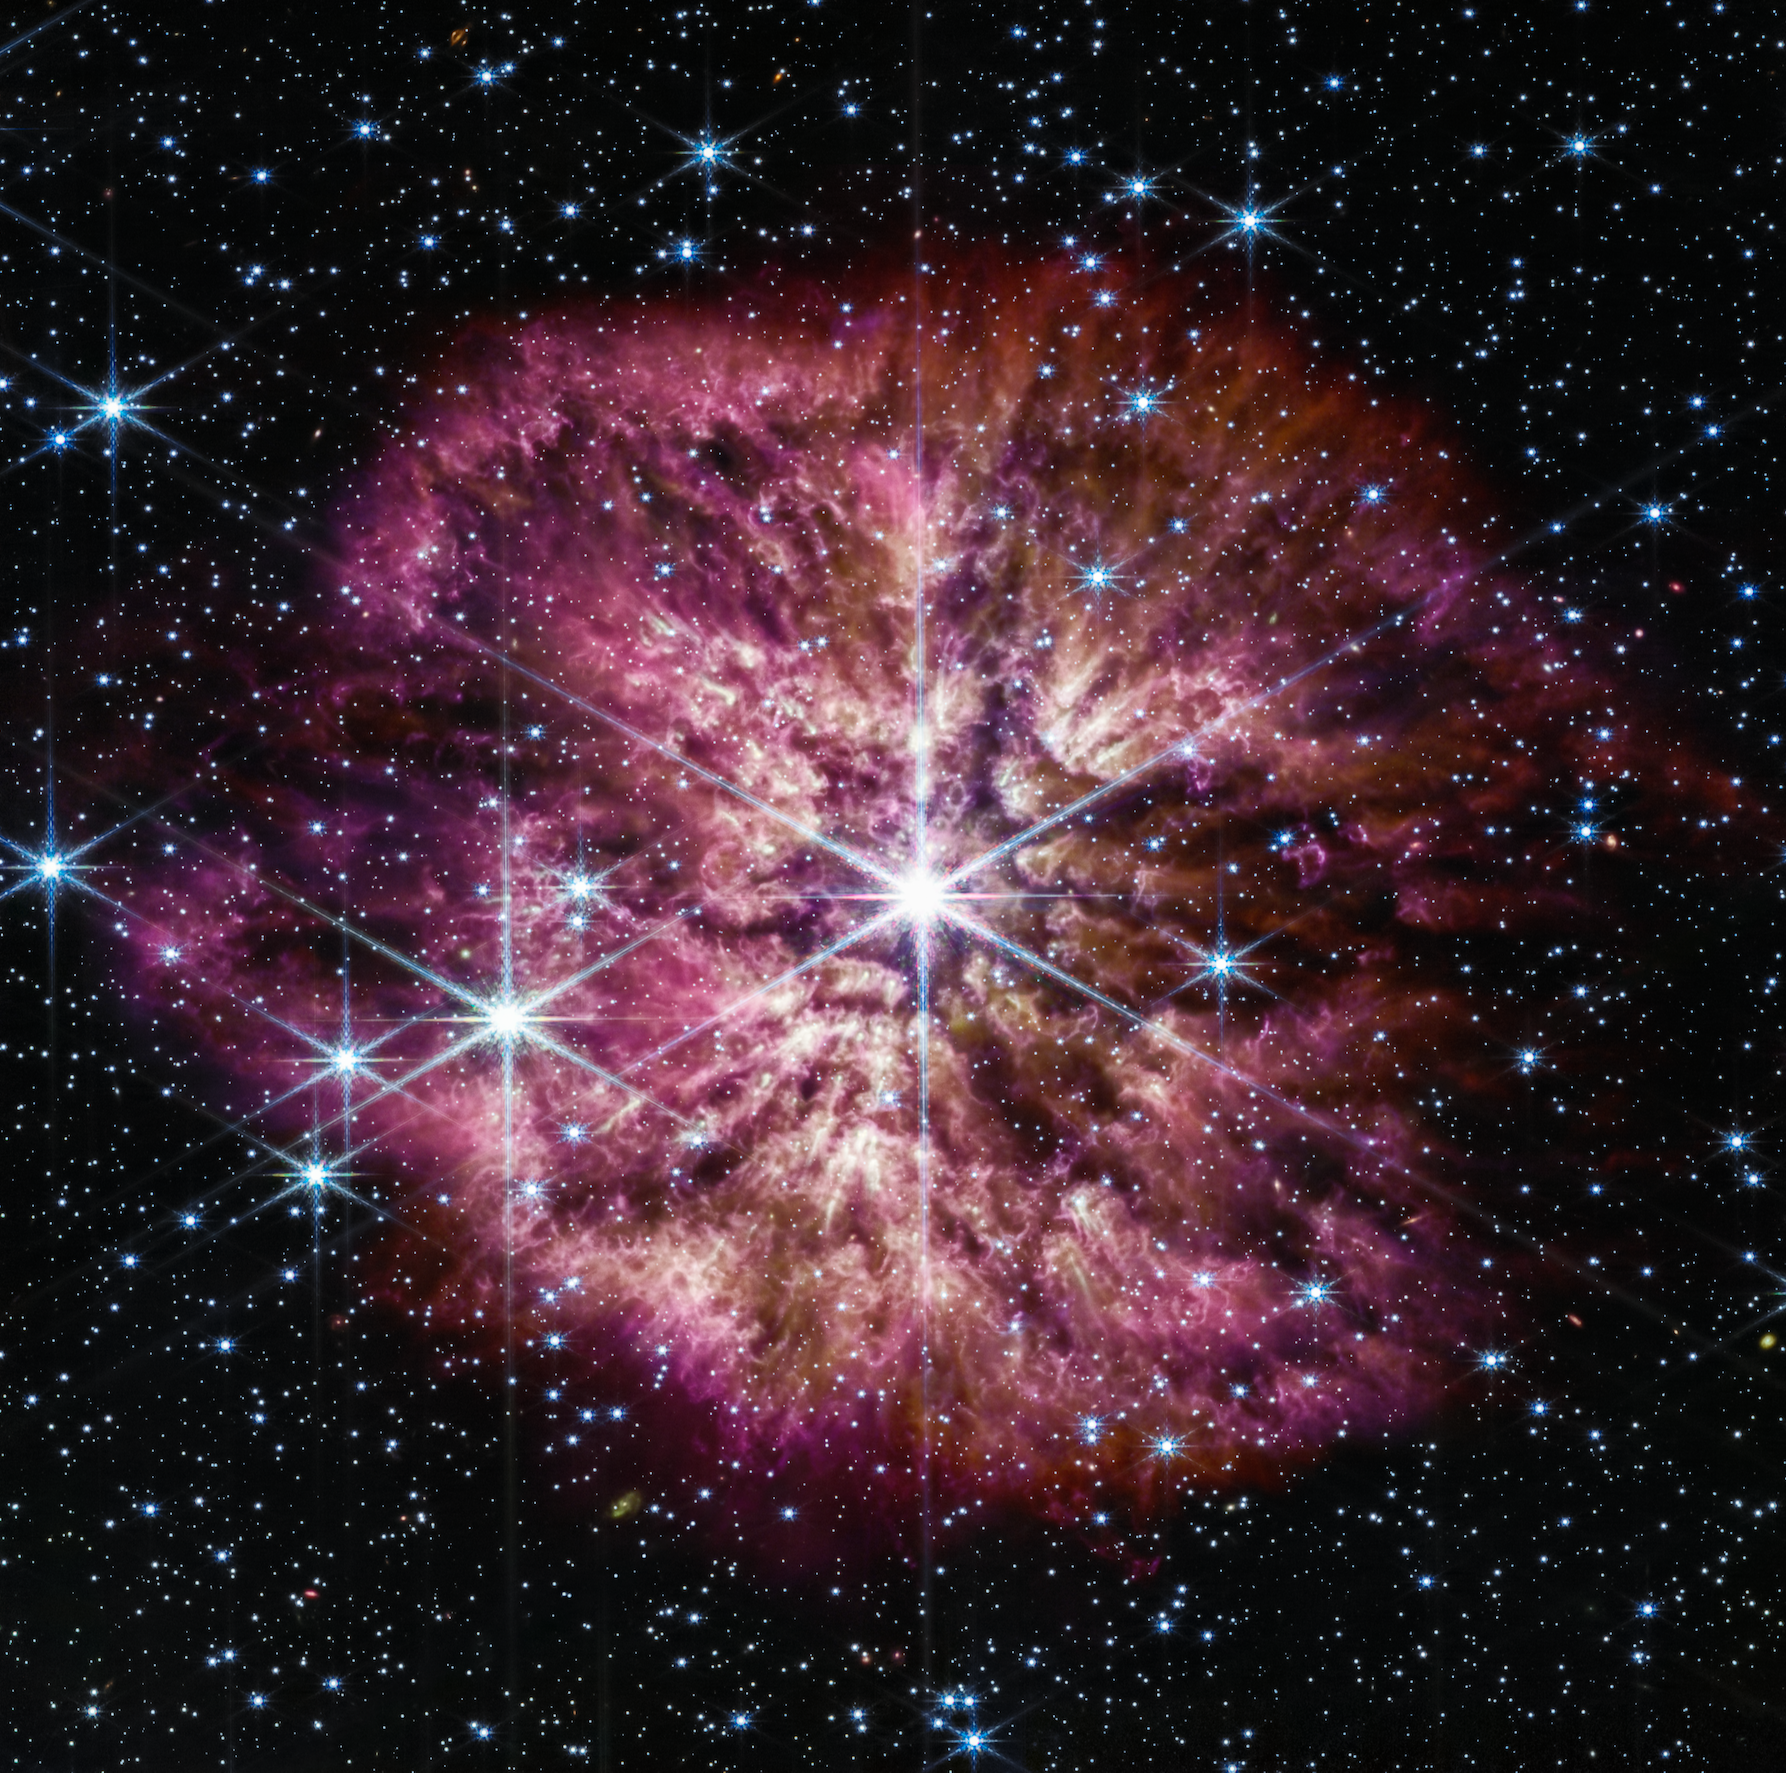 More Radiant Than a Million Suns, Wolf-Rayet Stars Tell the Story of Stellar Evolution